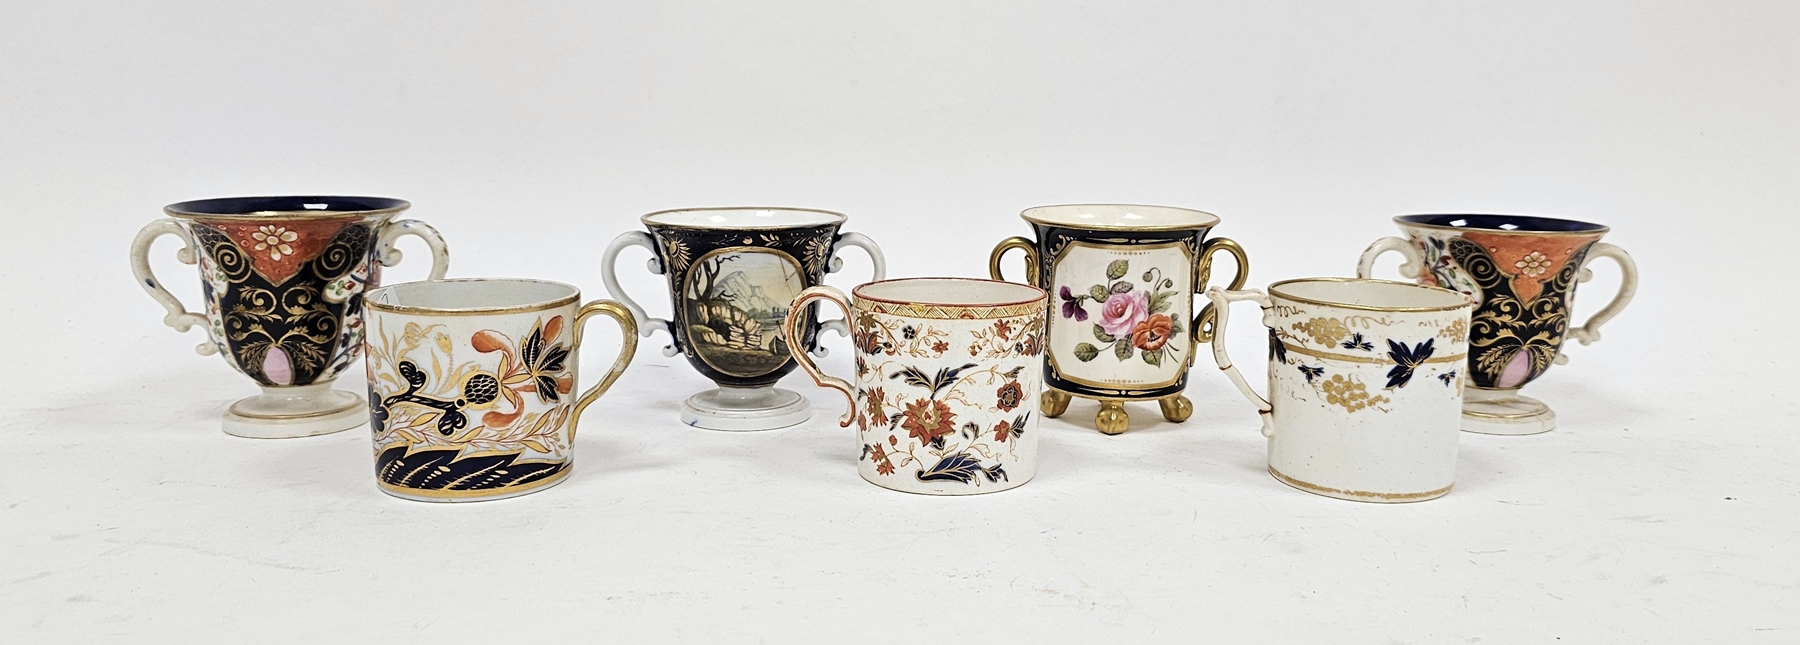 Group of Derby porcelain two-handled cups and a group of English porcelain coffee cans, circa 1820'